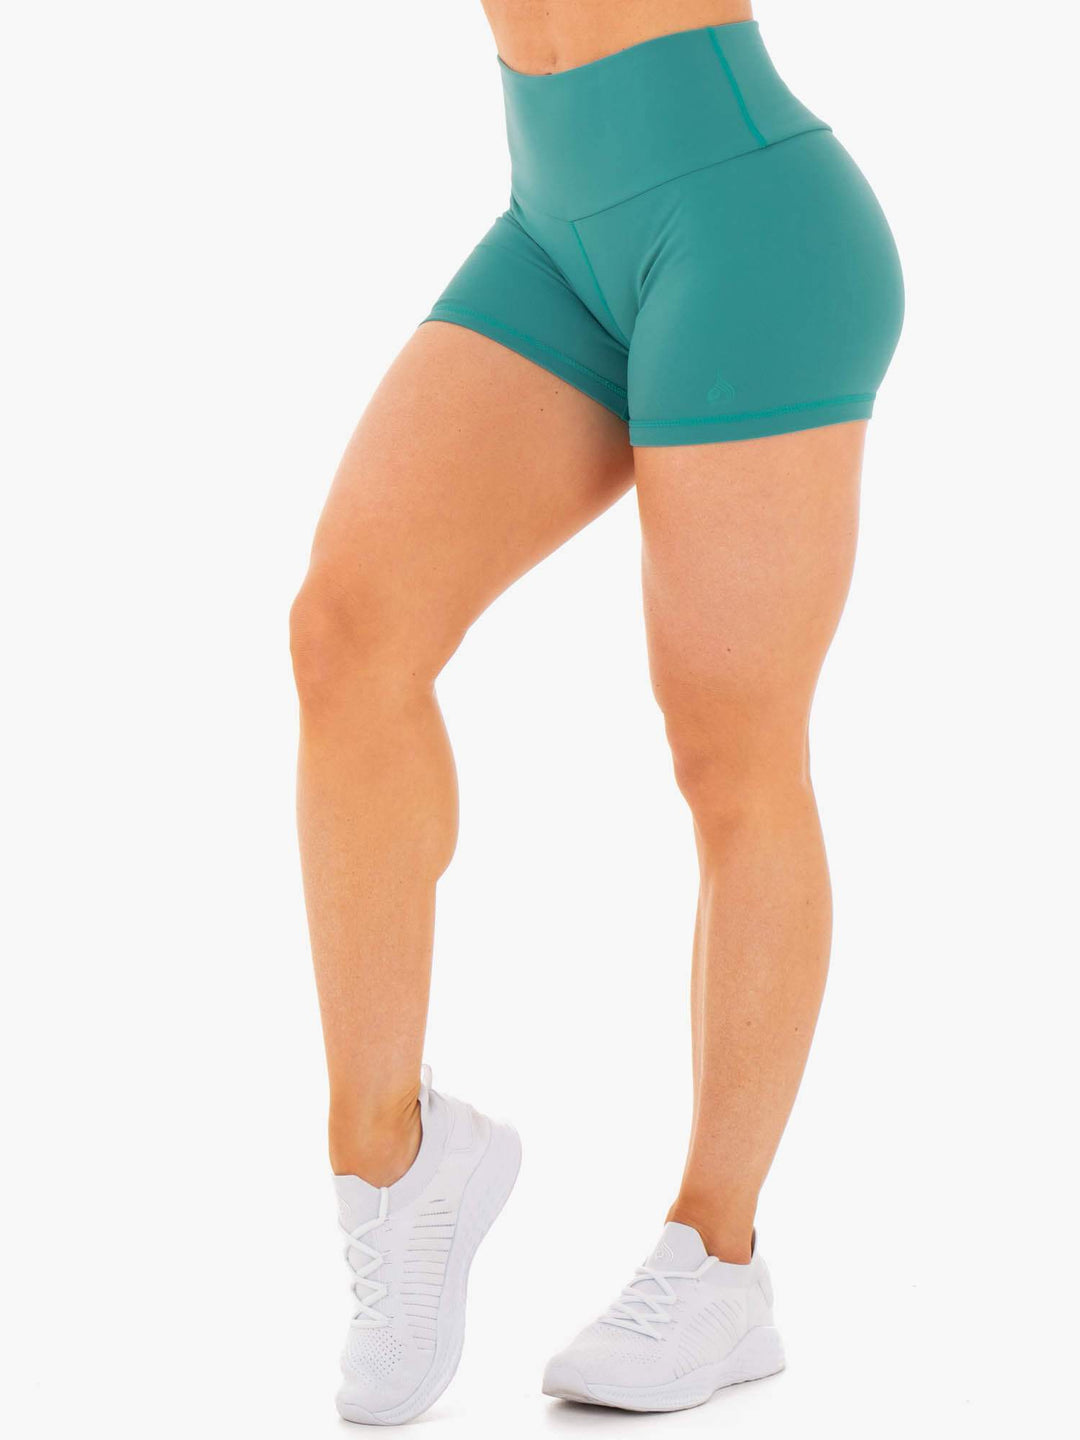 Motion High Waisted Shorts - Teal Clothing Ryderwear 